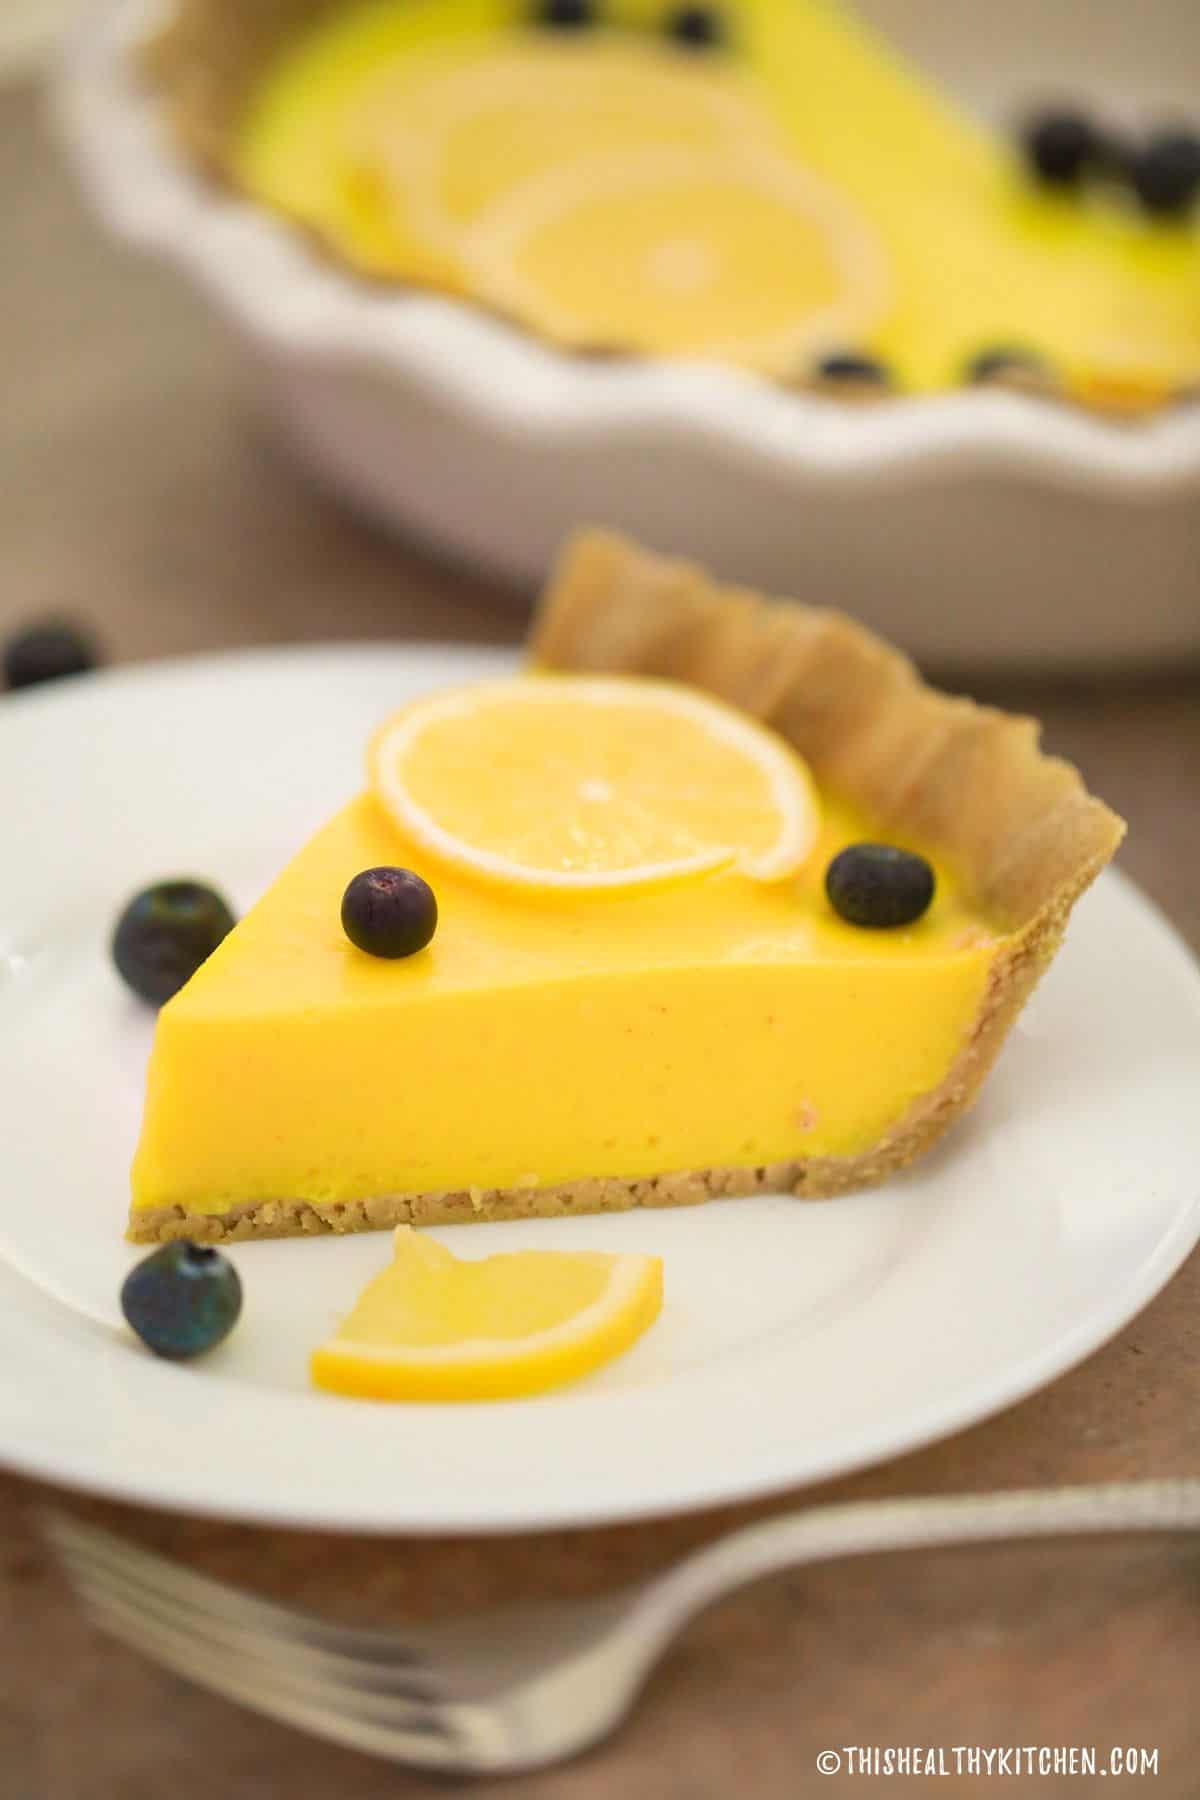 Slice of lemon pie in plate with remaining pie in the background.